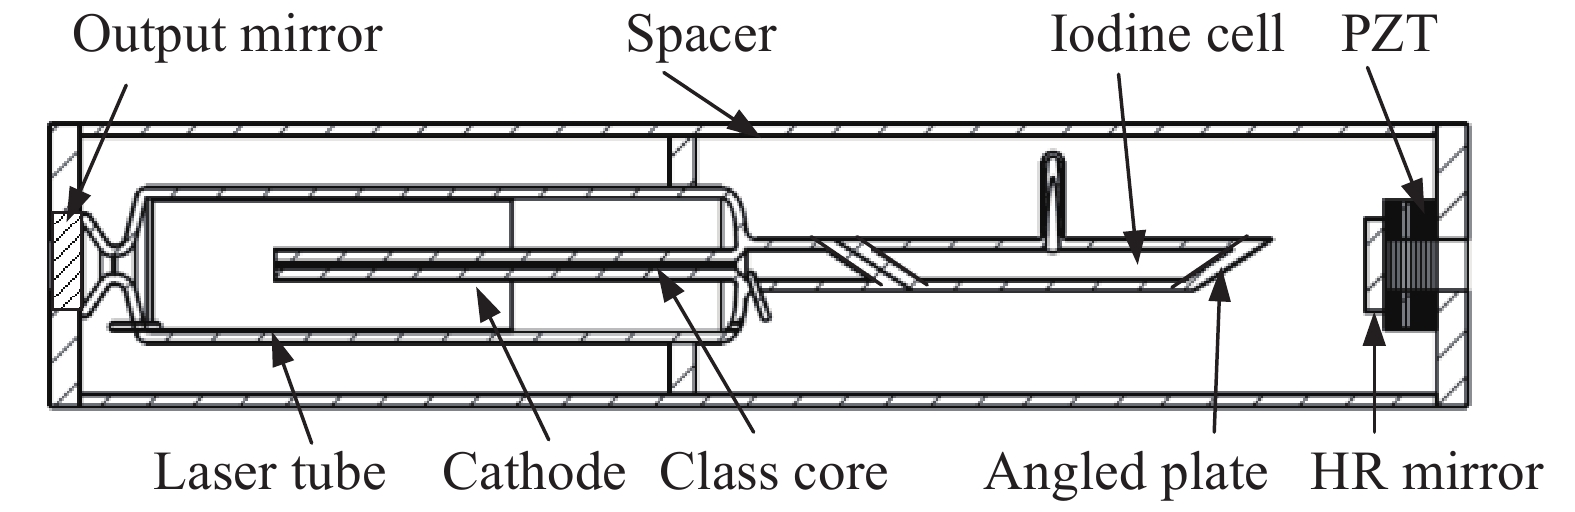 Schematic of high output power iodine stabilized He-Ne laser